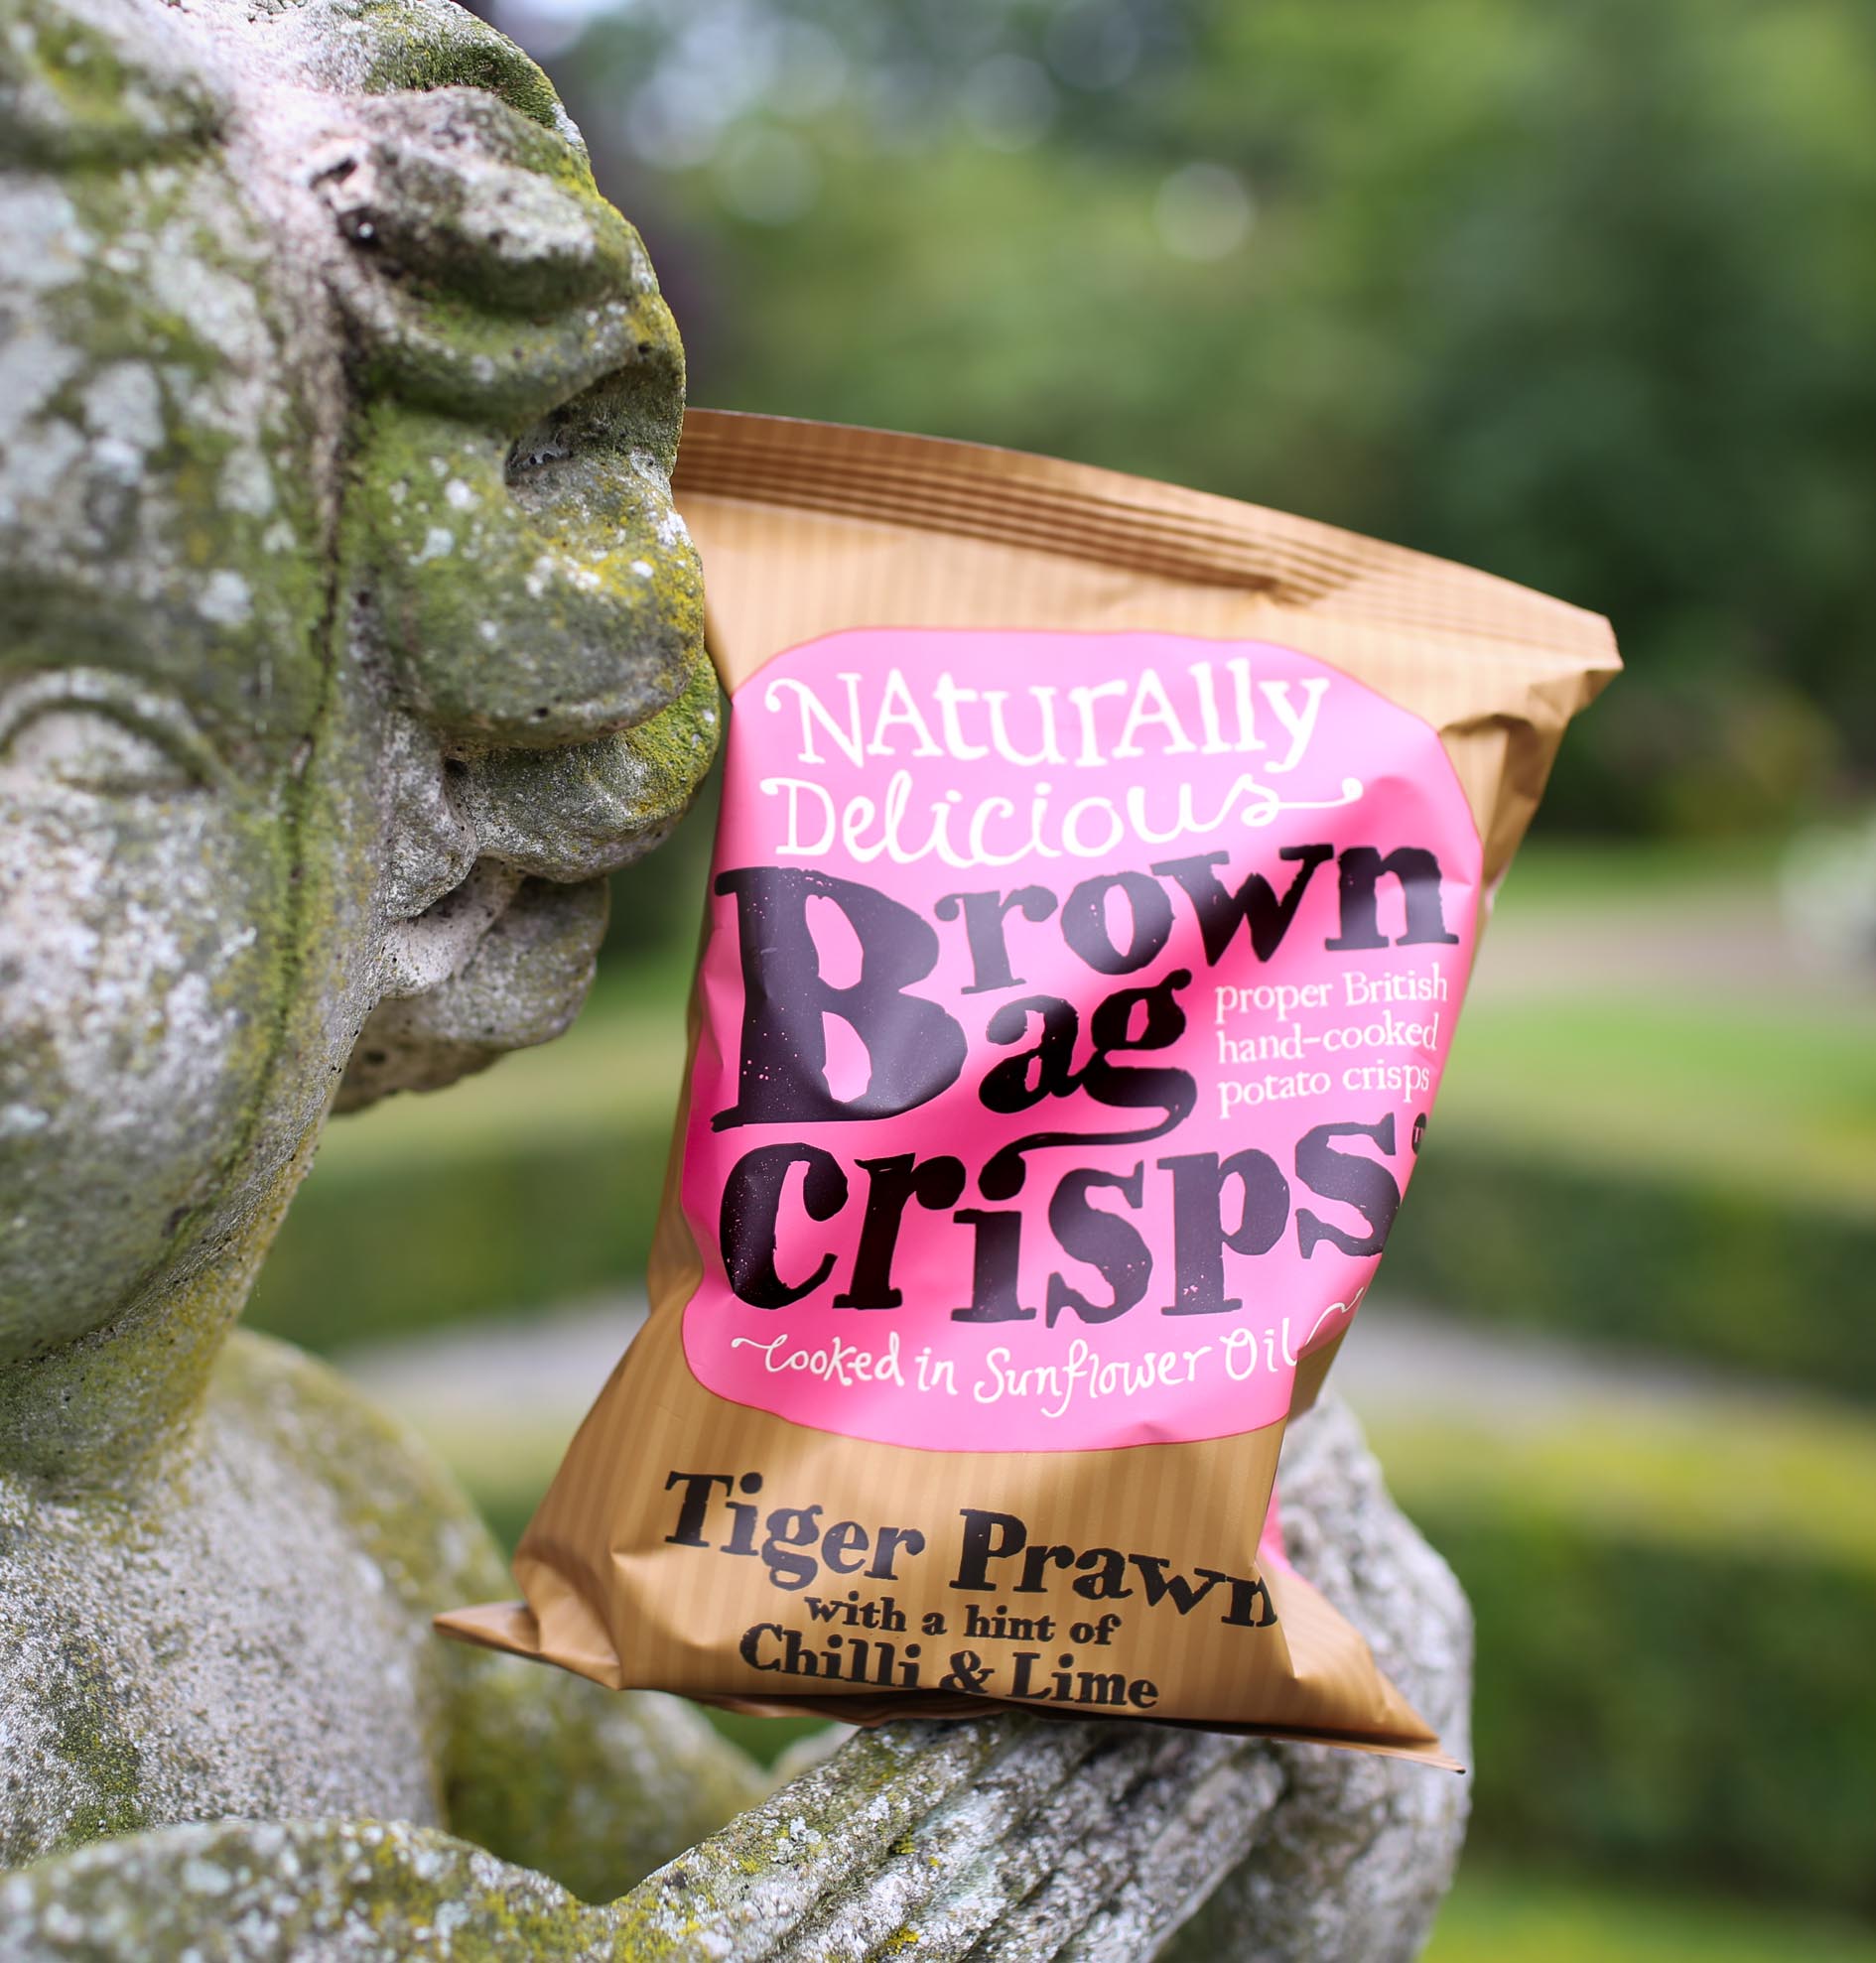 Brown Bag Crisps - Tiger Prawn with a hint of Chilli and Lime